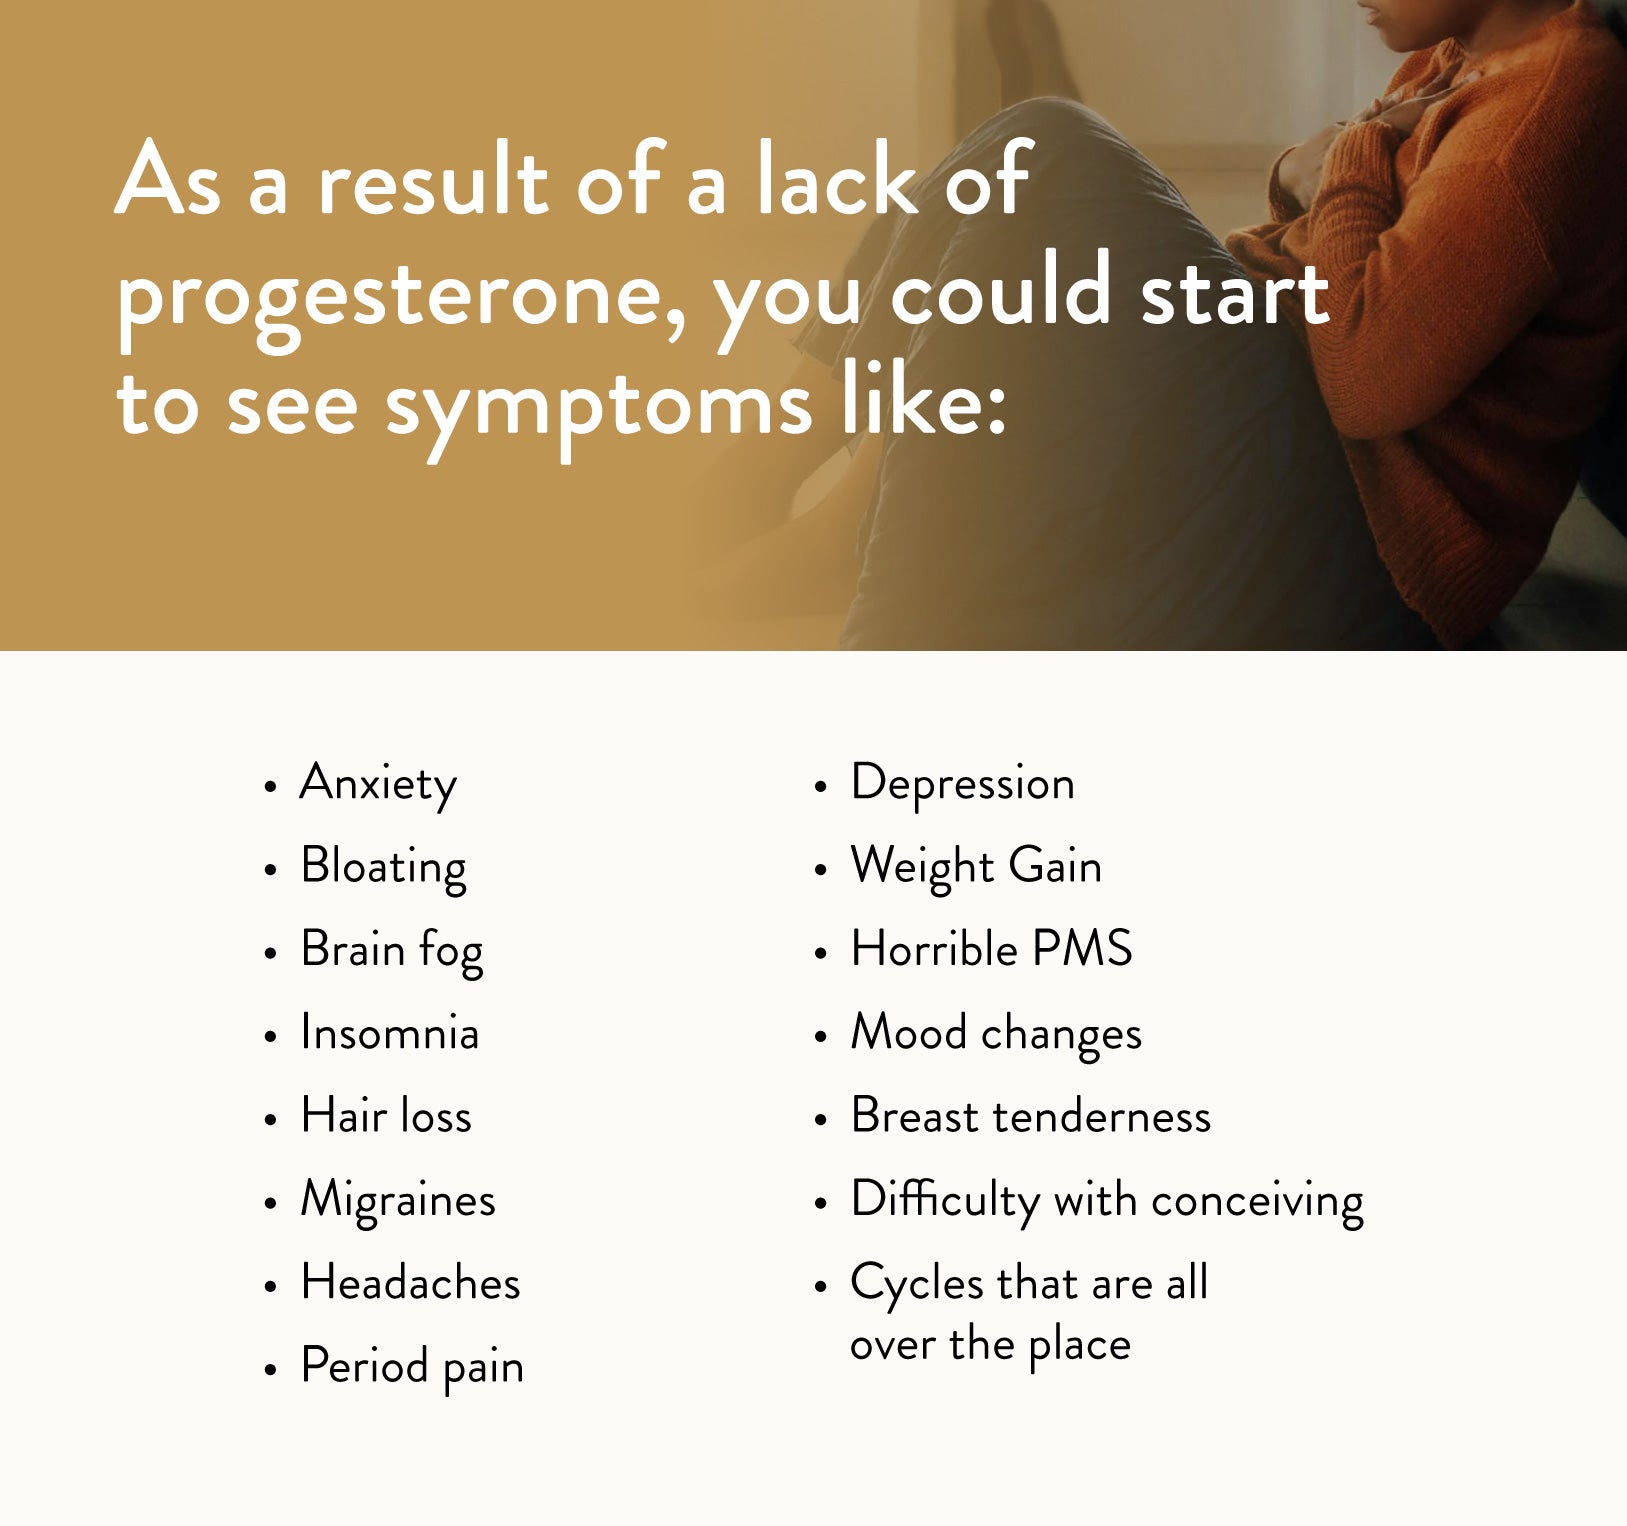 As a result of a lack of progesterone, you could start to see symptoms like